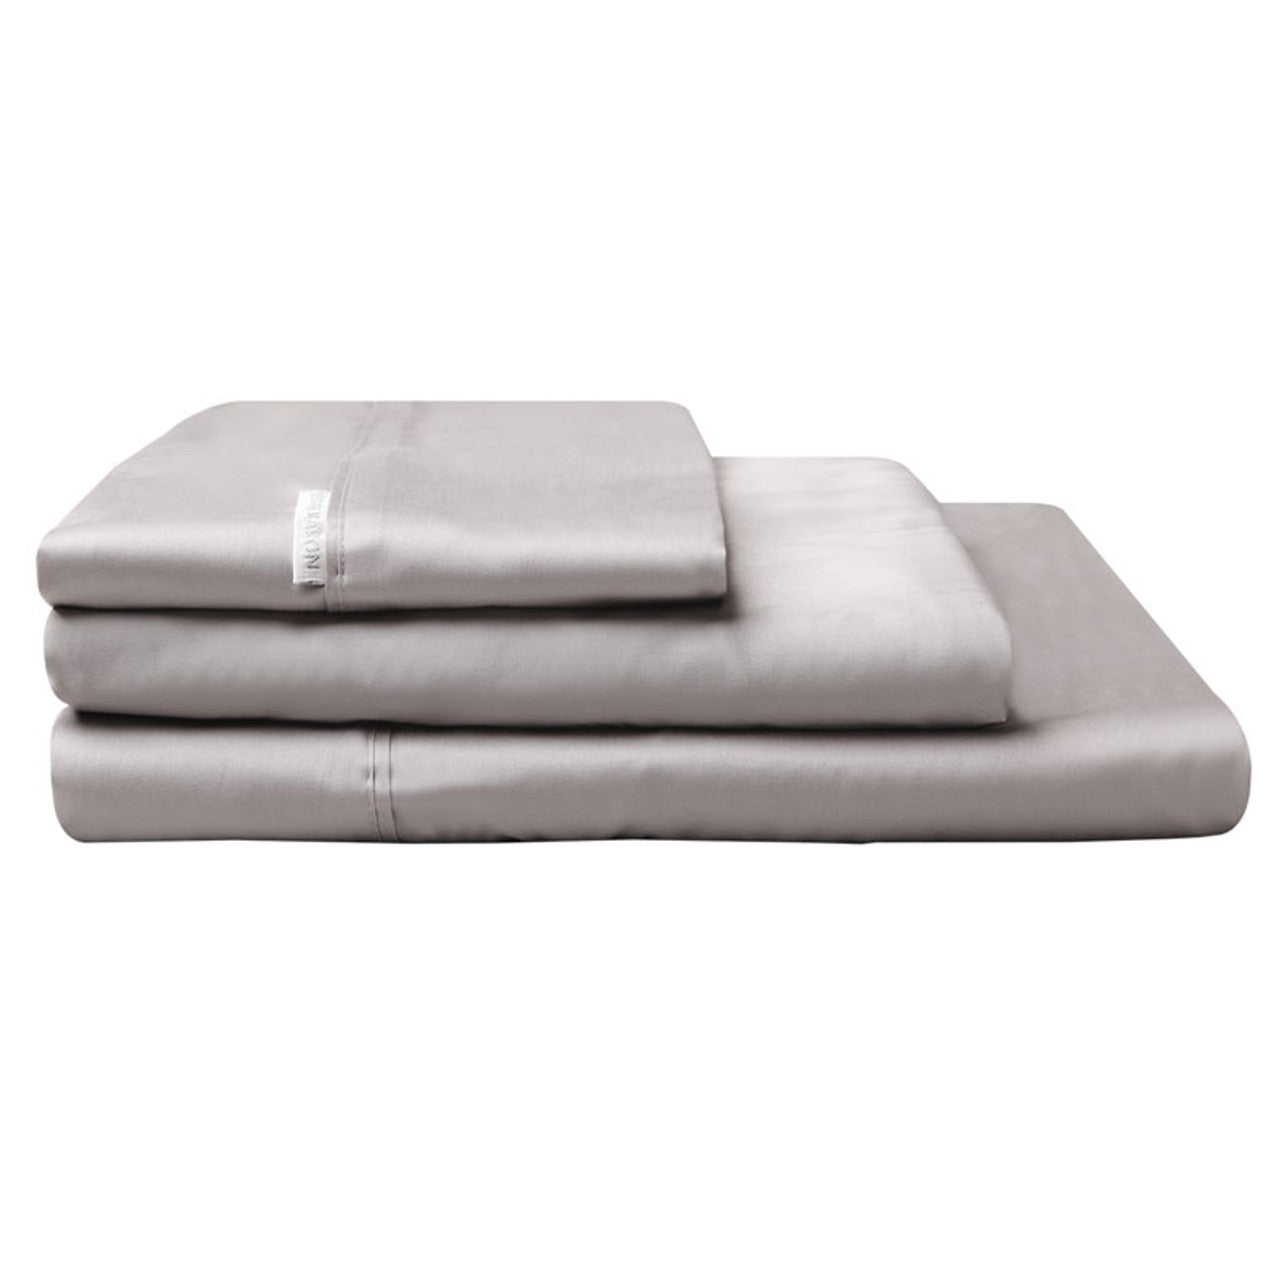 Indulge in the pinnacle of luxury with the Pewter Bed Sheet Sets by Logan and Mason. Crafted from pure Egyptian Cotton with an impressive 400 thread count, these sheets offer unparalleled softness and a silky smooth feel. 